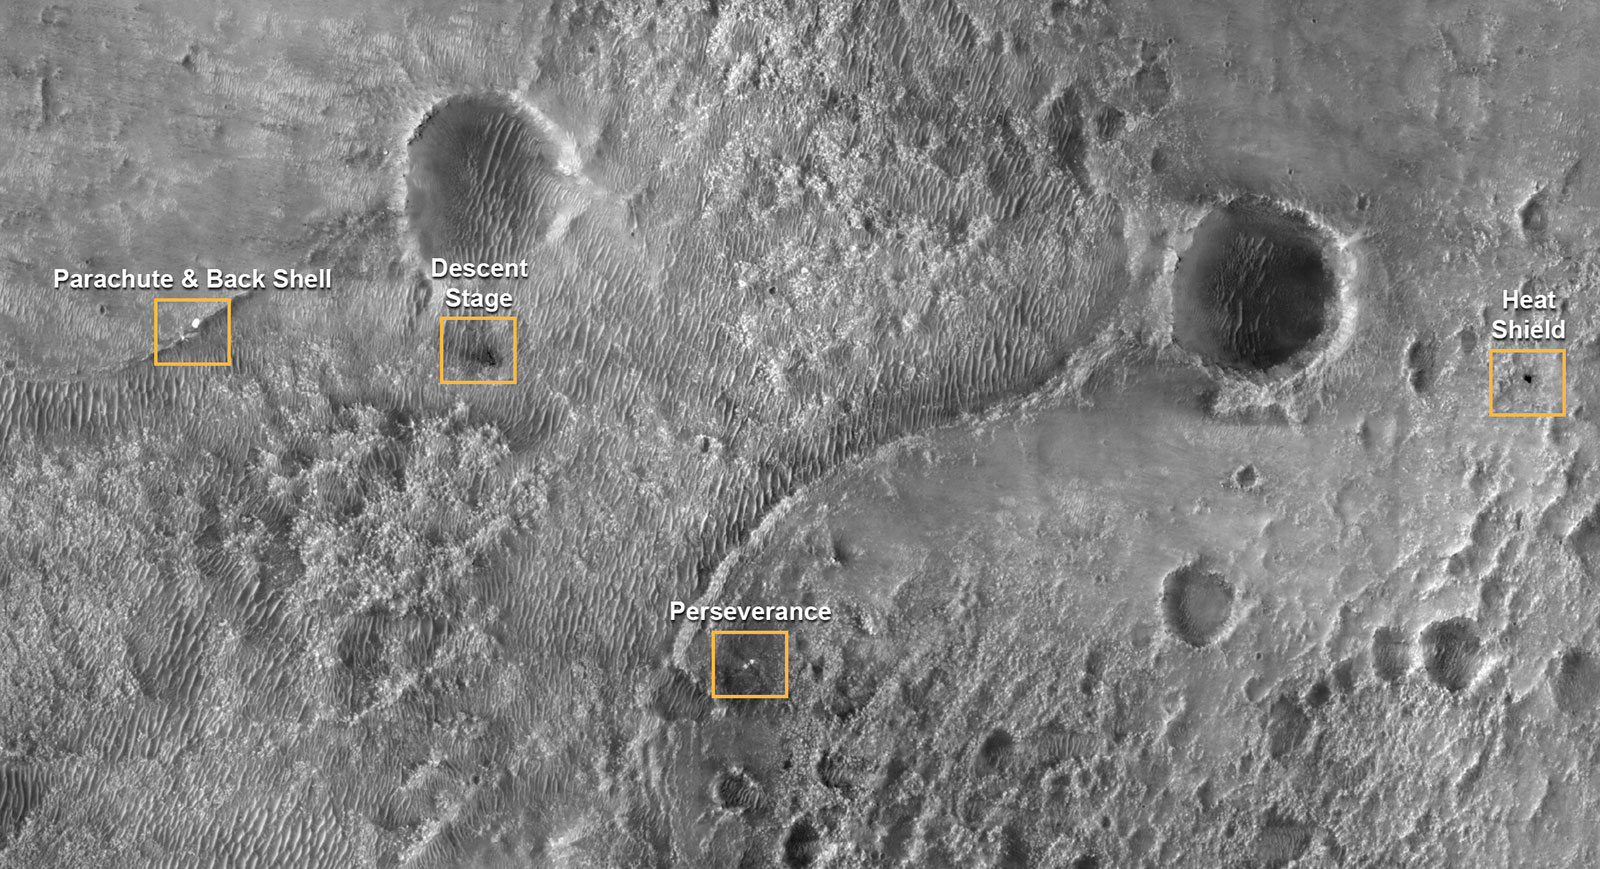 Mars Reconnaissance Orbiter (MRO) image showing the location of the rover, the parachute and back shell, the descent stage, and the heat shield.  (Image: NASA/JPL)